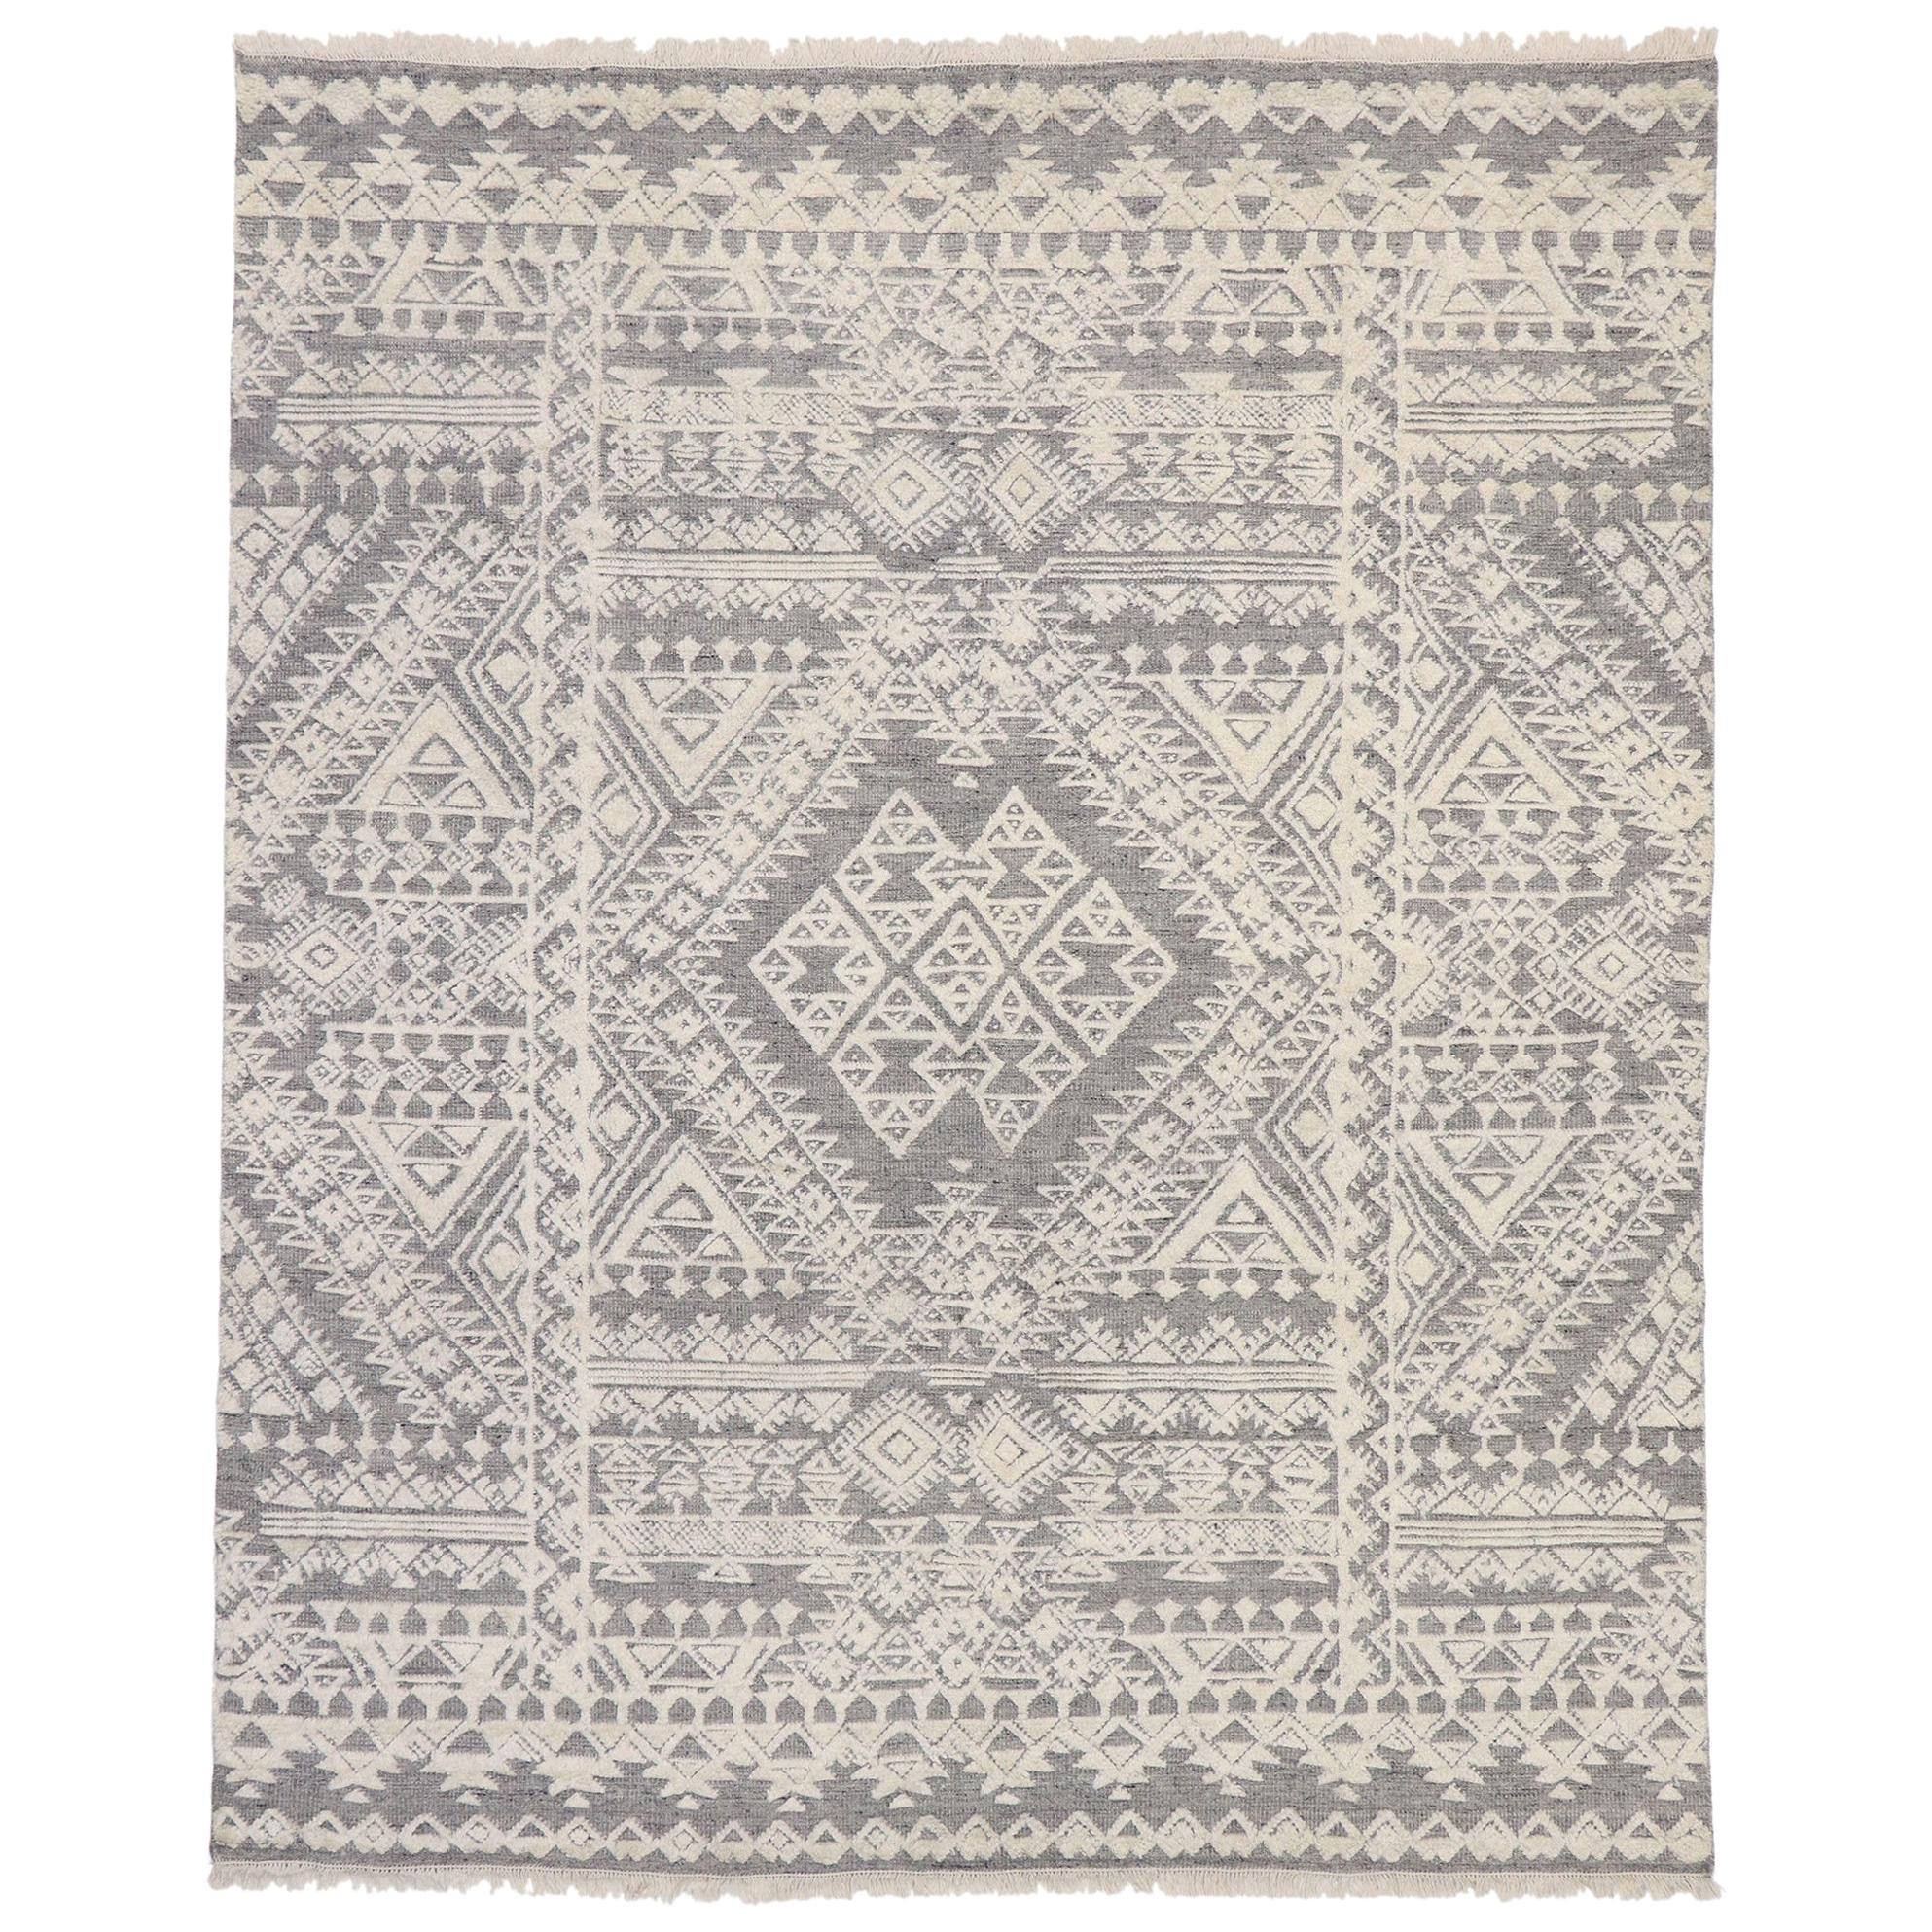 New Contemporary Moroccan Souf Rug with Raised Design and Modern Style